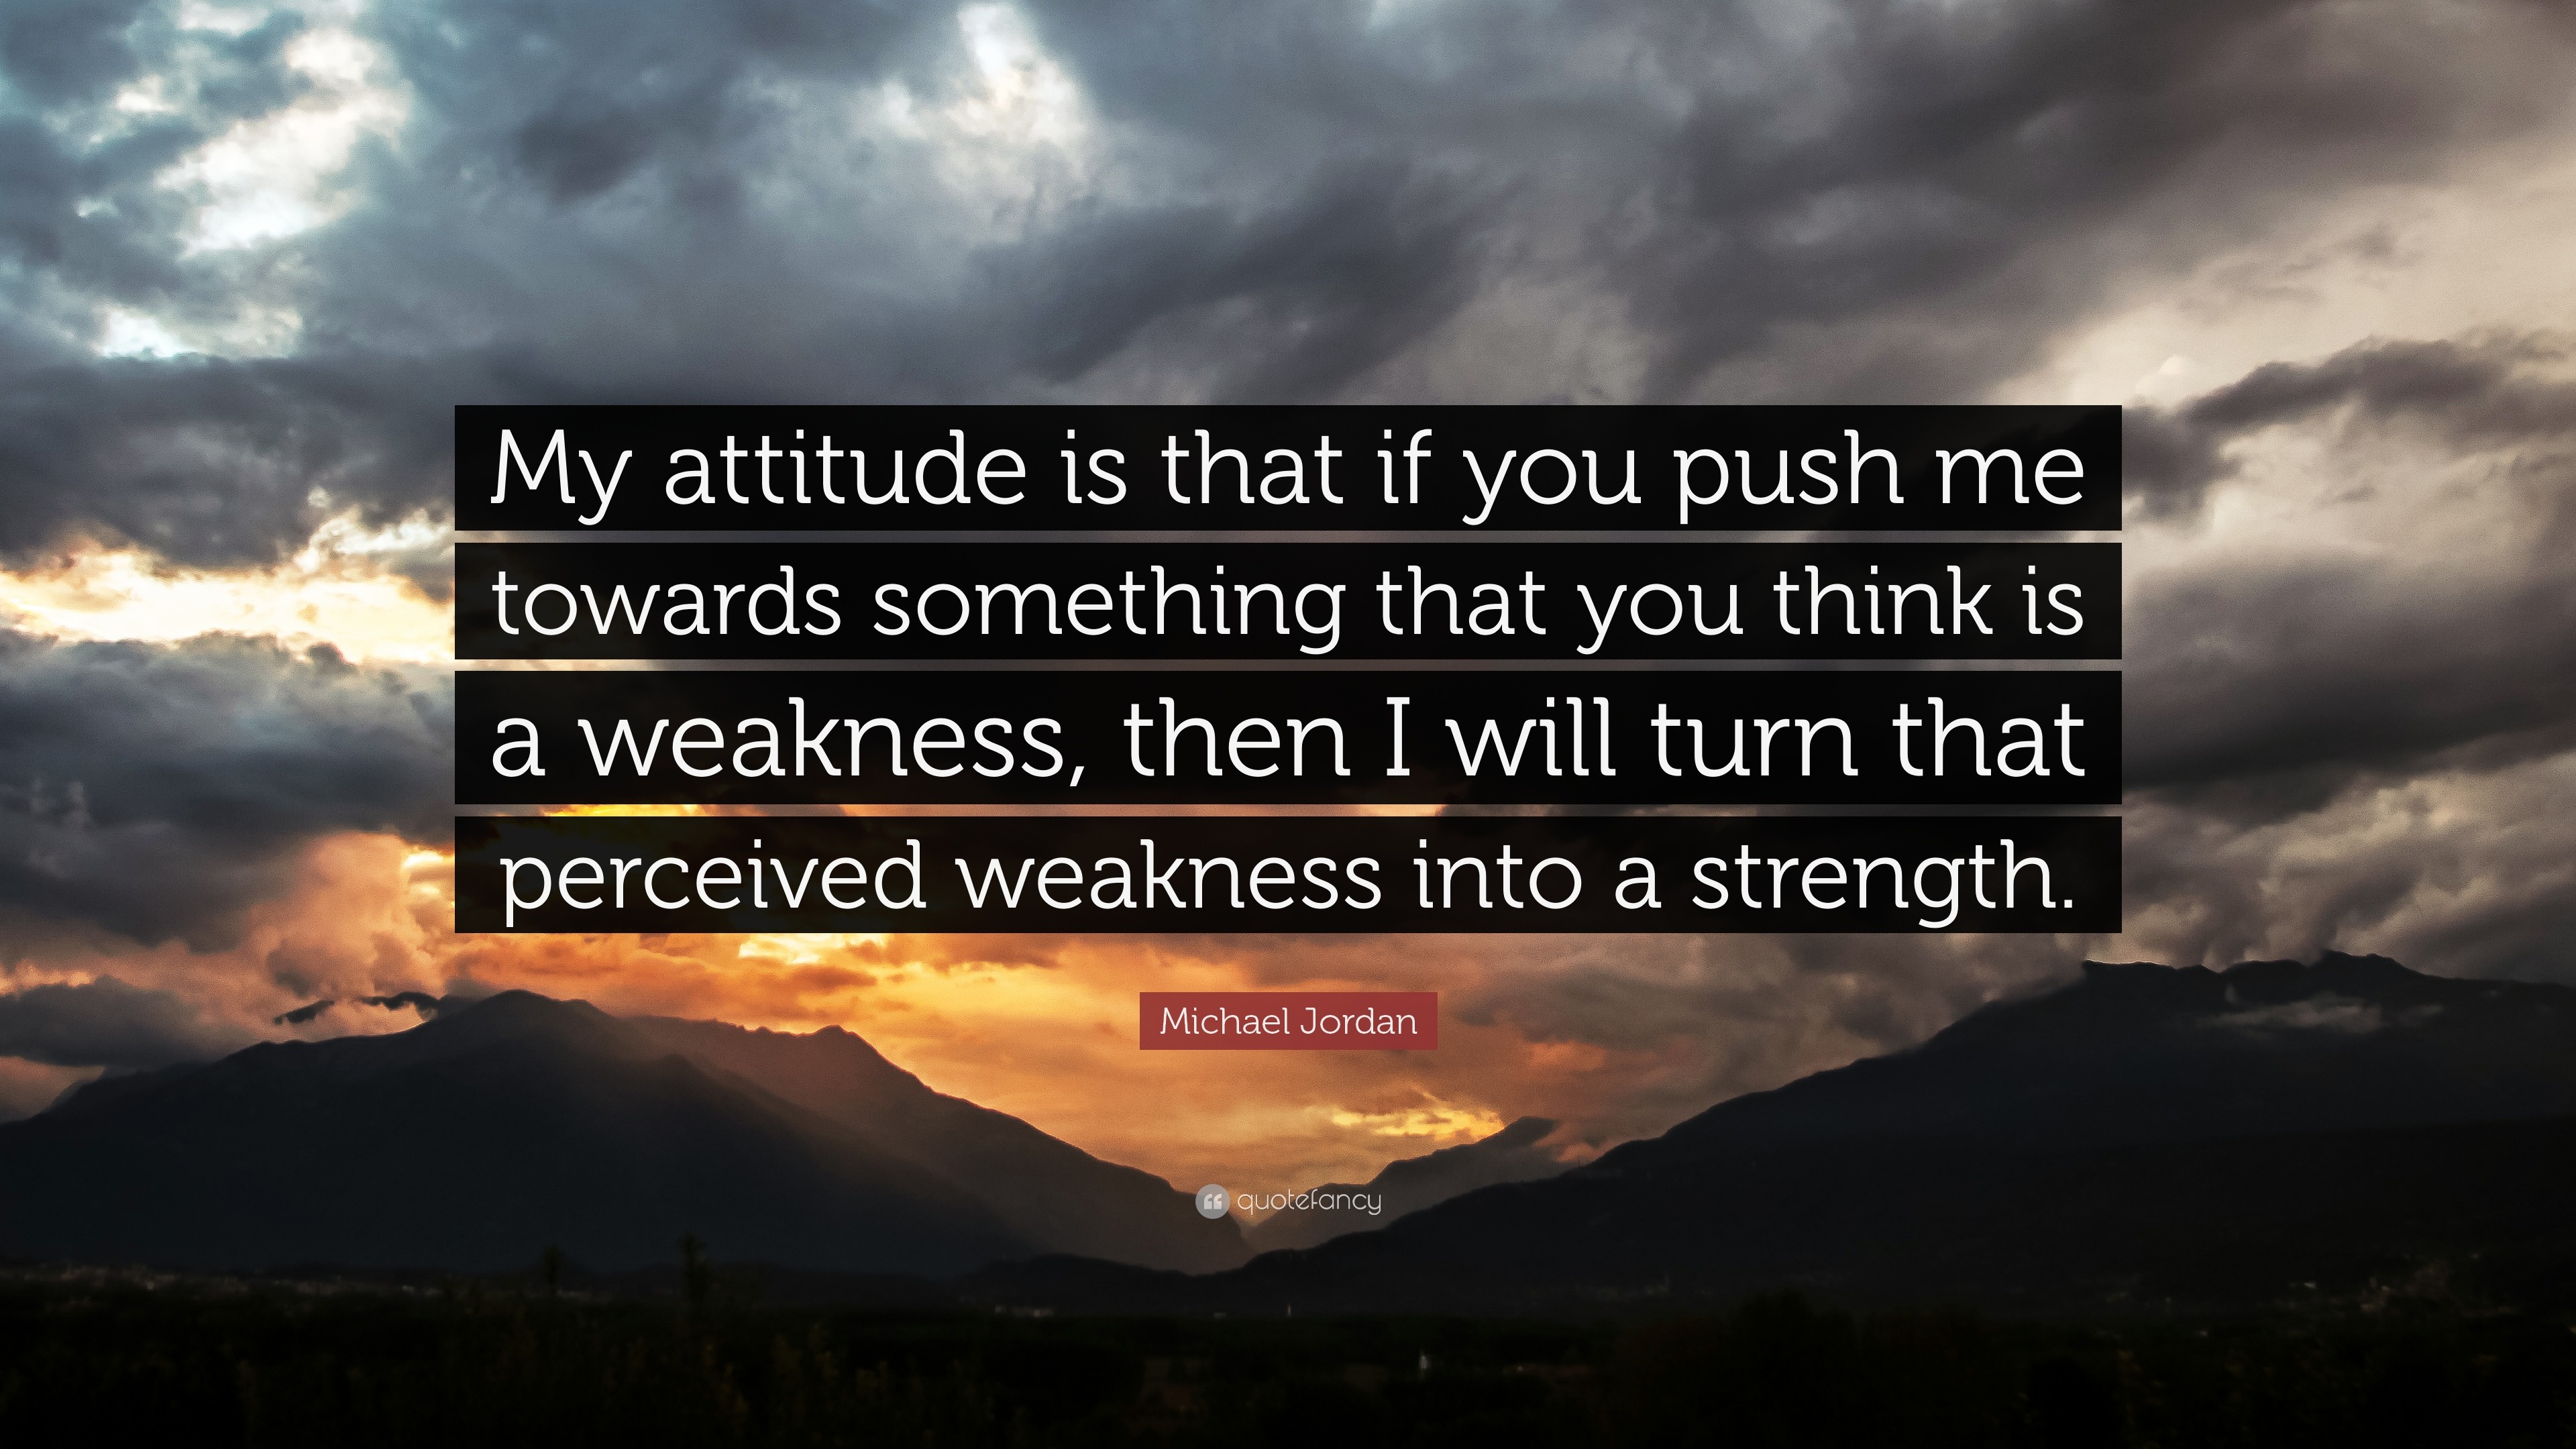 3840x2160 Michael Jordan Quote: “My attitude is that if you push me towards something  that